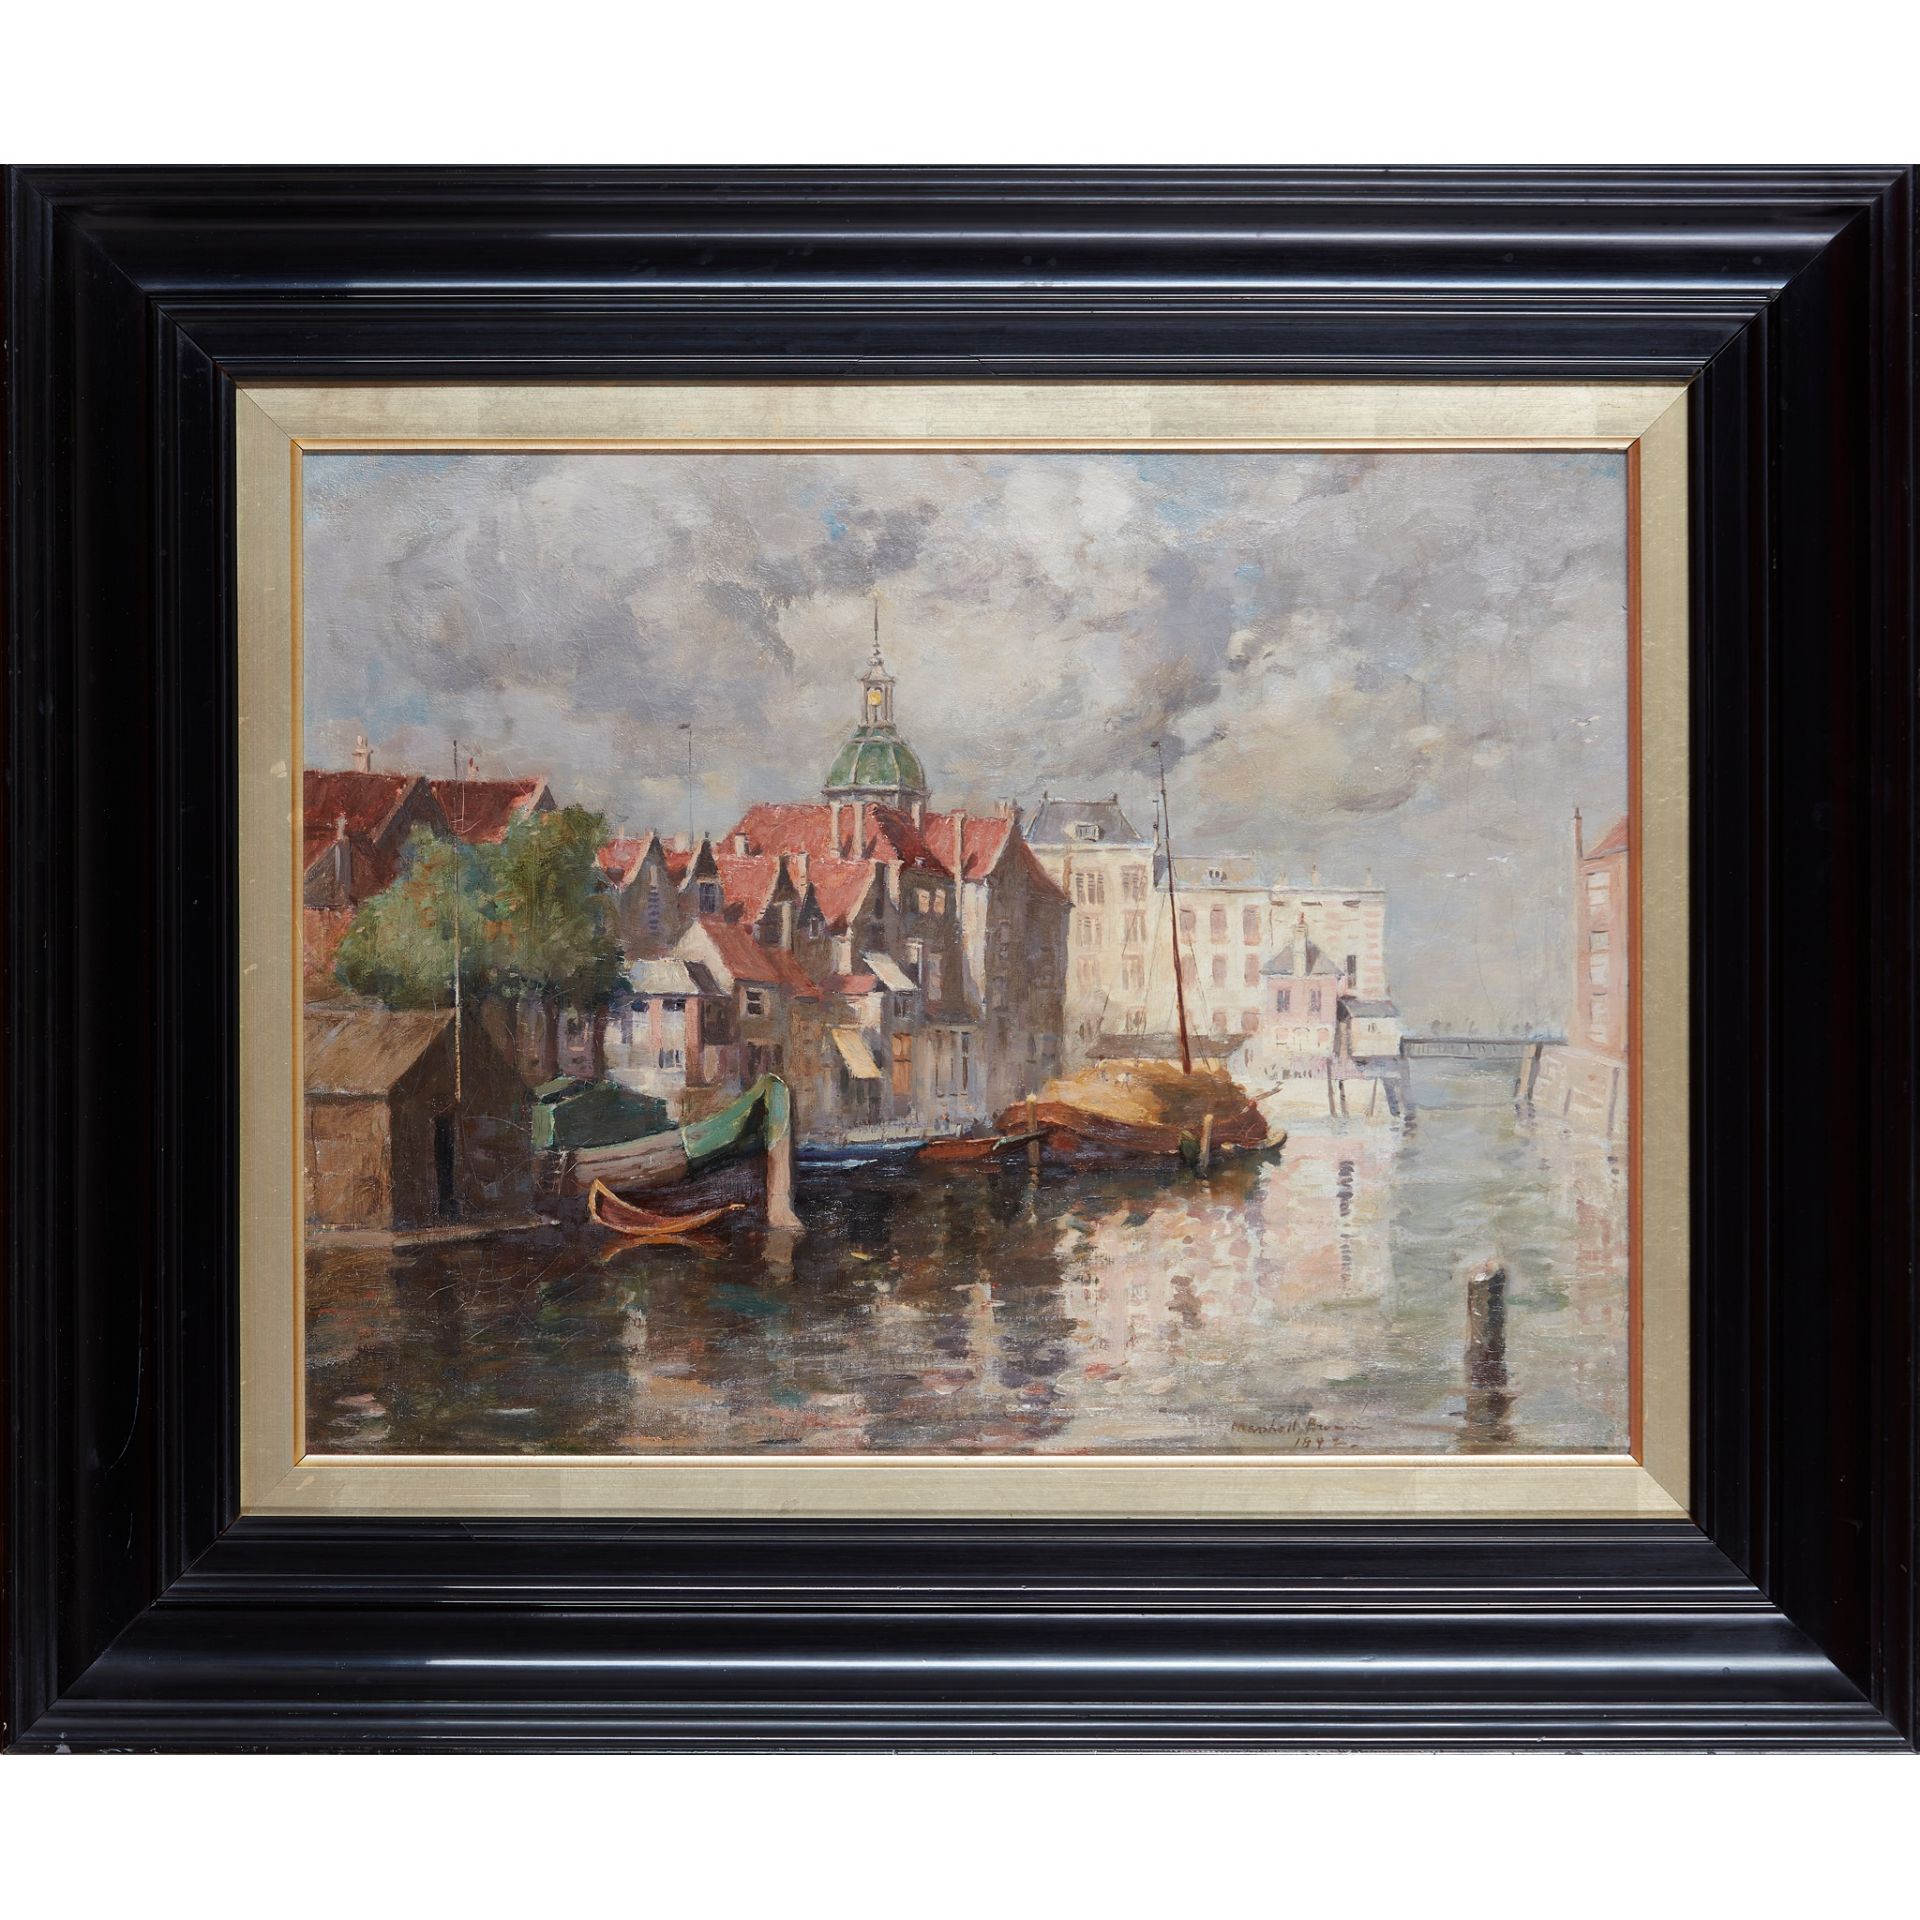 WILLIAM MARSHALL BROWN R.S.A., R.S.W (SCOTTISH 1863-1936) BARGES IN A RIVERSIDE TOWN - Image 2 of 3